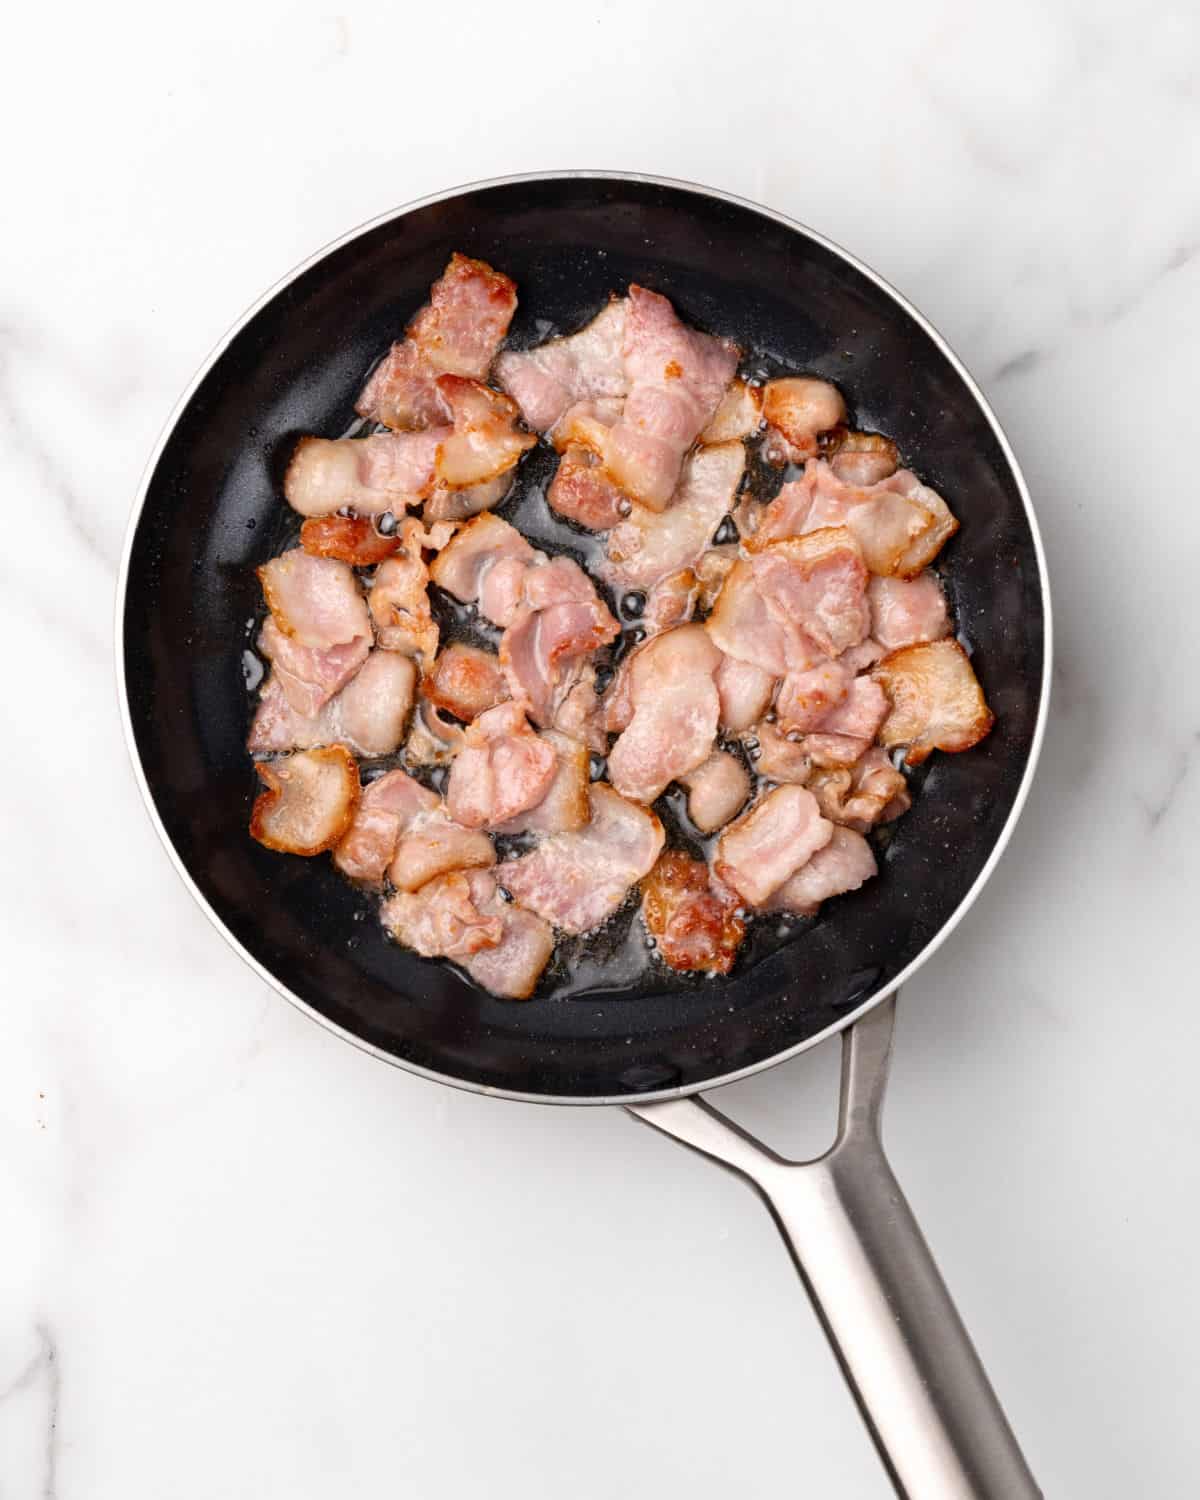 Bacon strips rendering on a black and metal skillet. White marble surface.